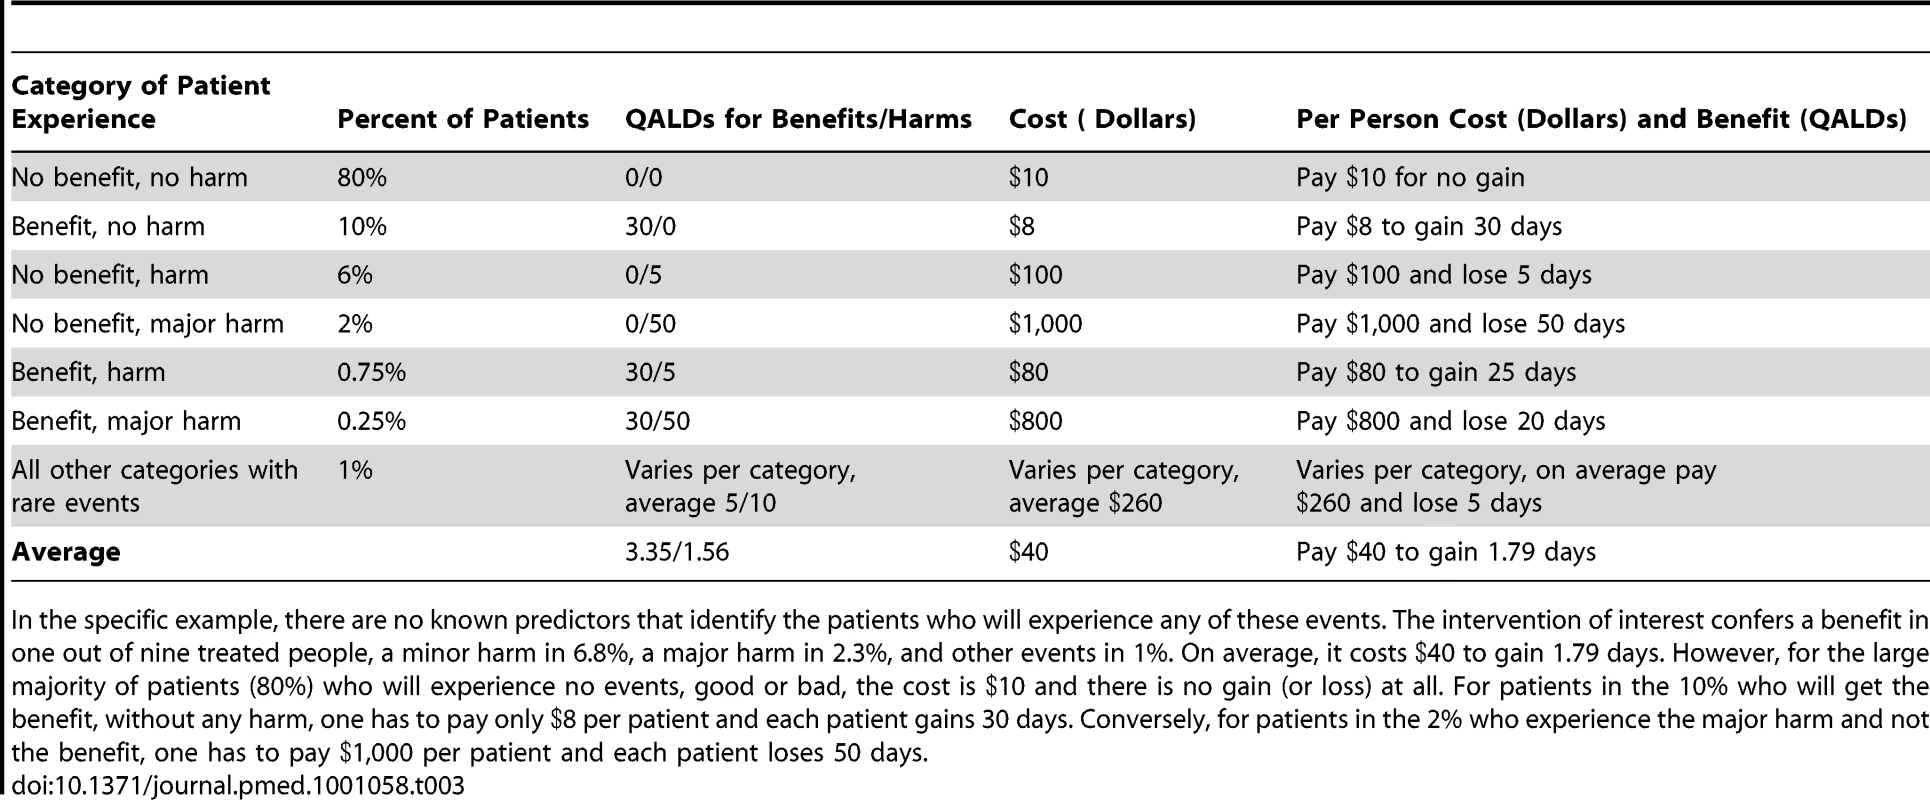 Hypothetical example of different individual experiences for patients who do and do not experience different events (benefit, harm, major harm, or other rare events).